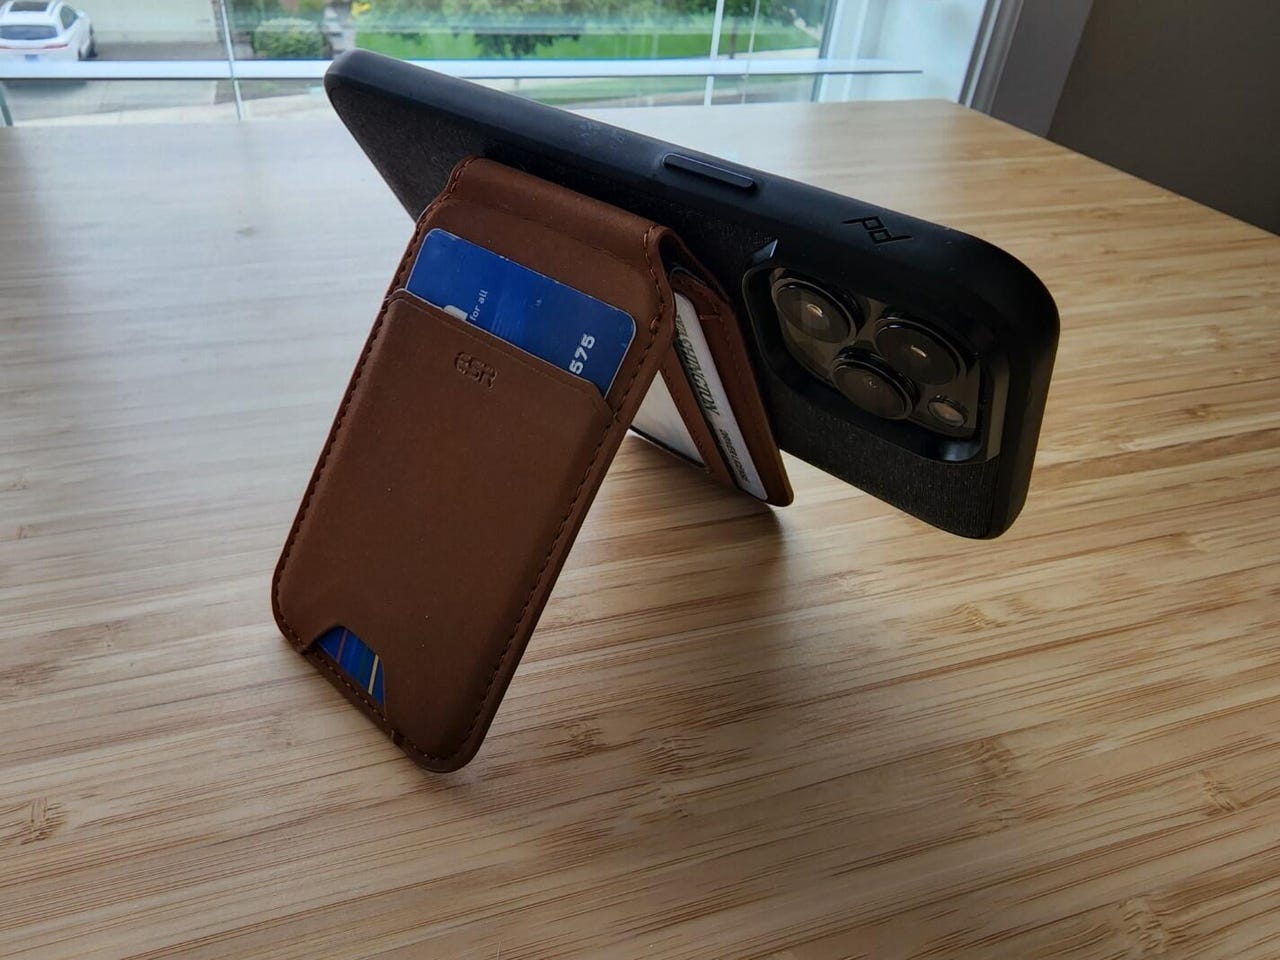 ESR HaloLock Wallet Stand hands-on: Multi-card wallet and